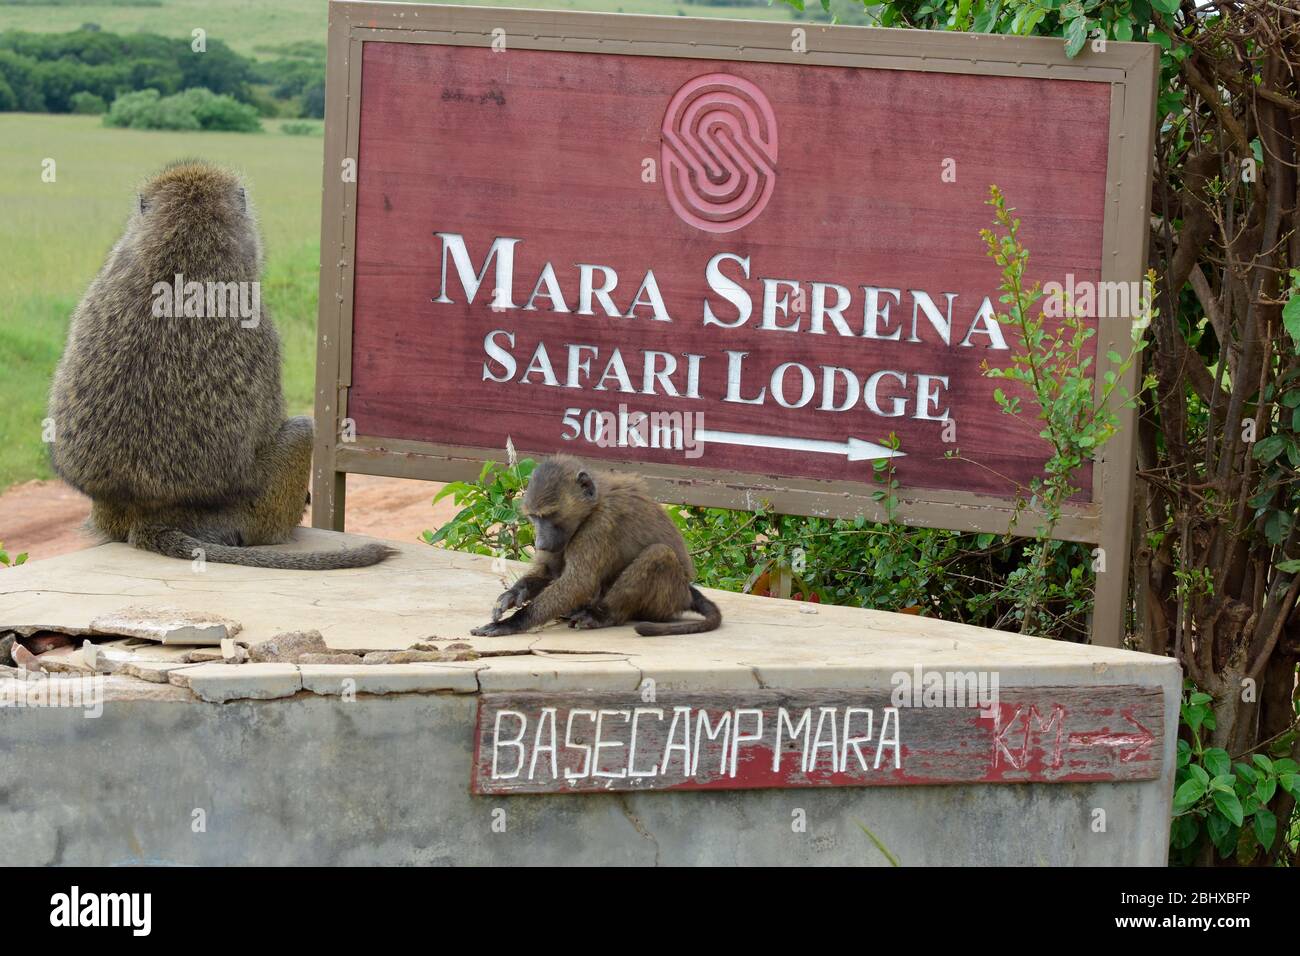 baboons are so interesting to watch. These two are sitting in Masai Mara on a road sign to Mara Serena Safari Lodge Stock Photo